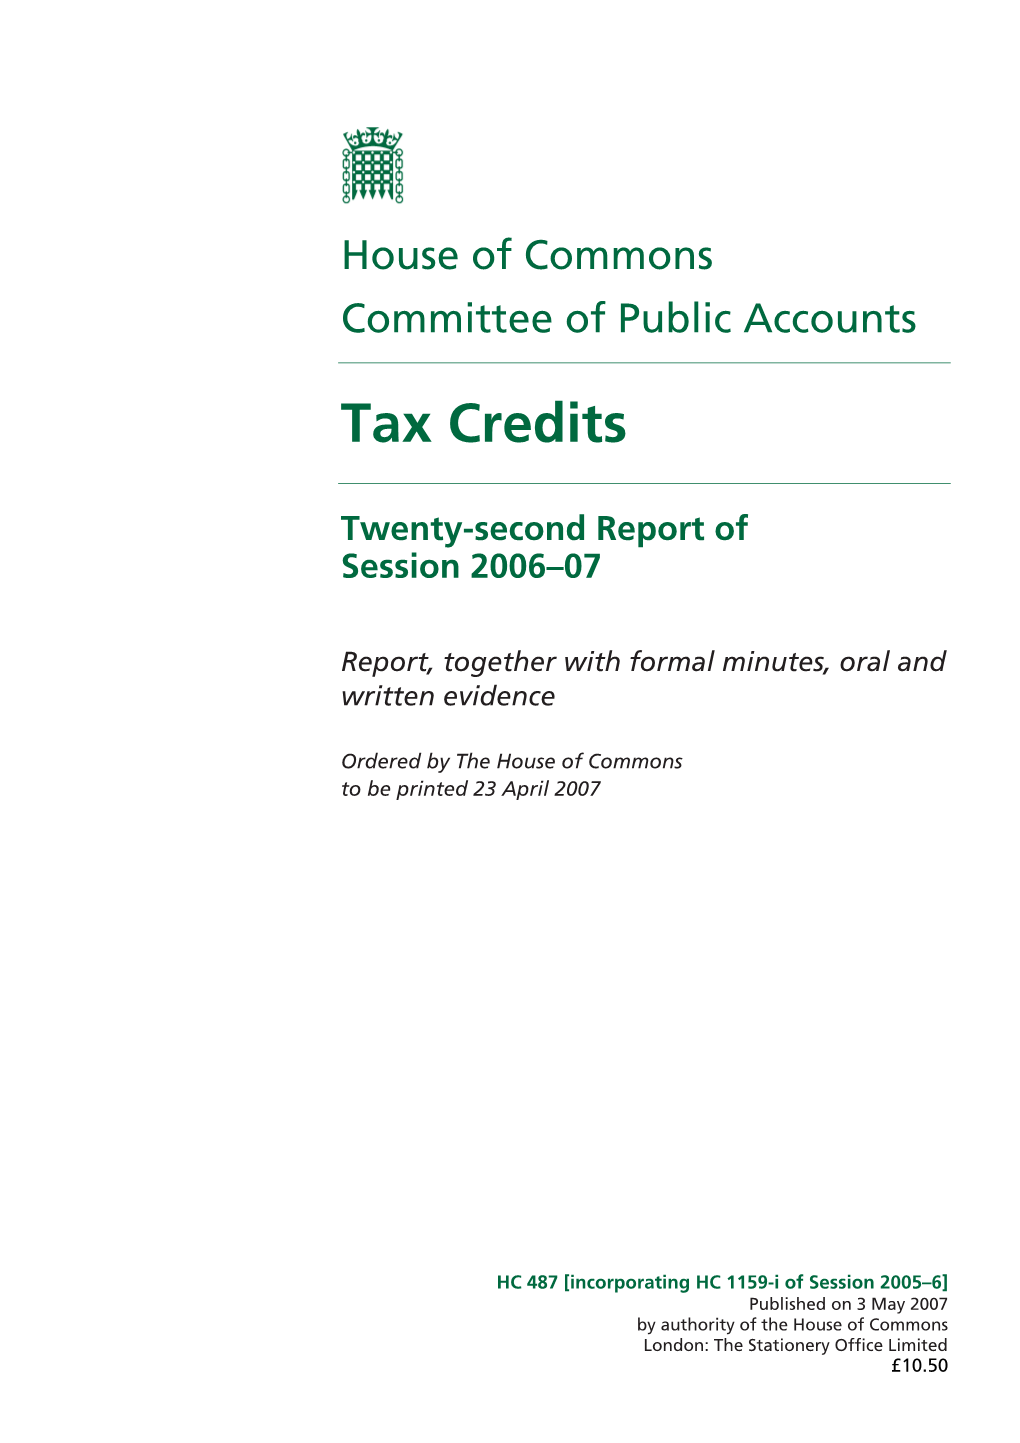 59-I of Session 2005–6] Published on 3 May 2007 by Authority of the House of Commons London: the Stationery Office Limited £10.50